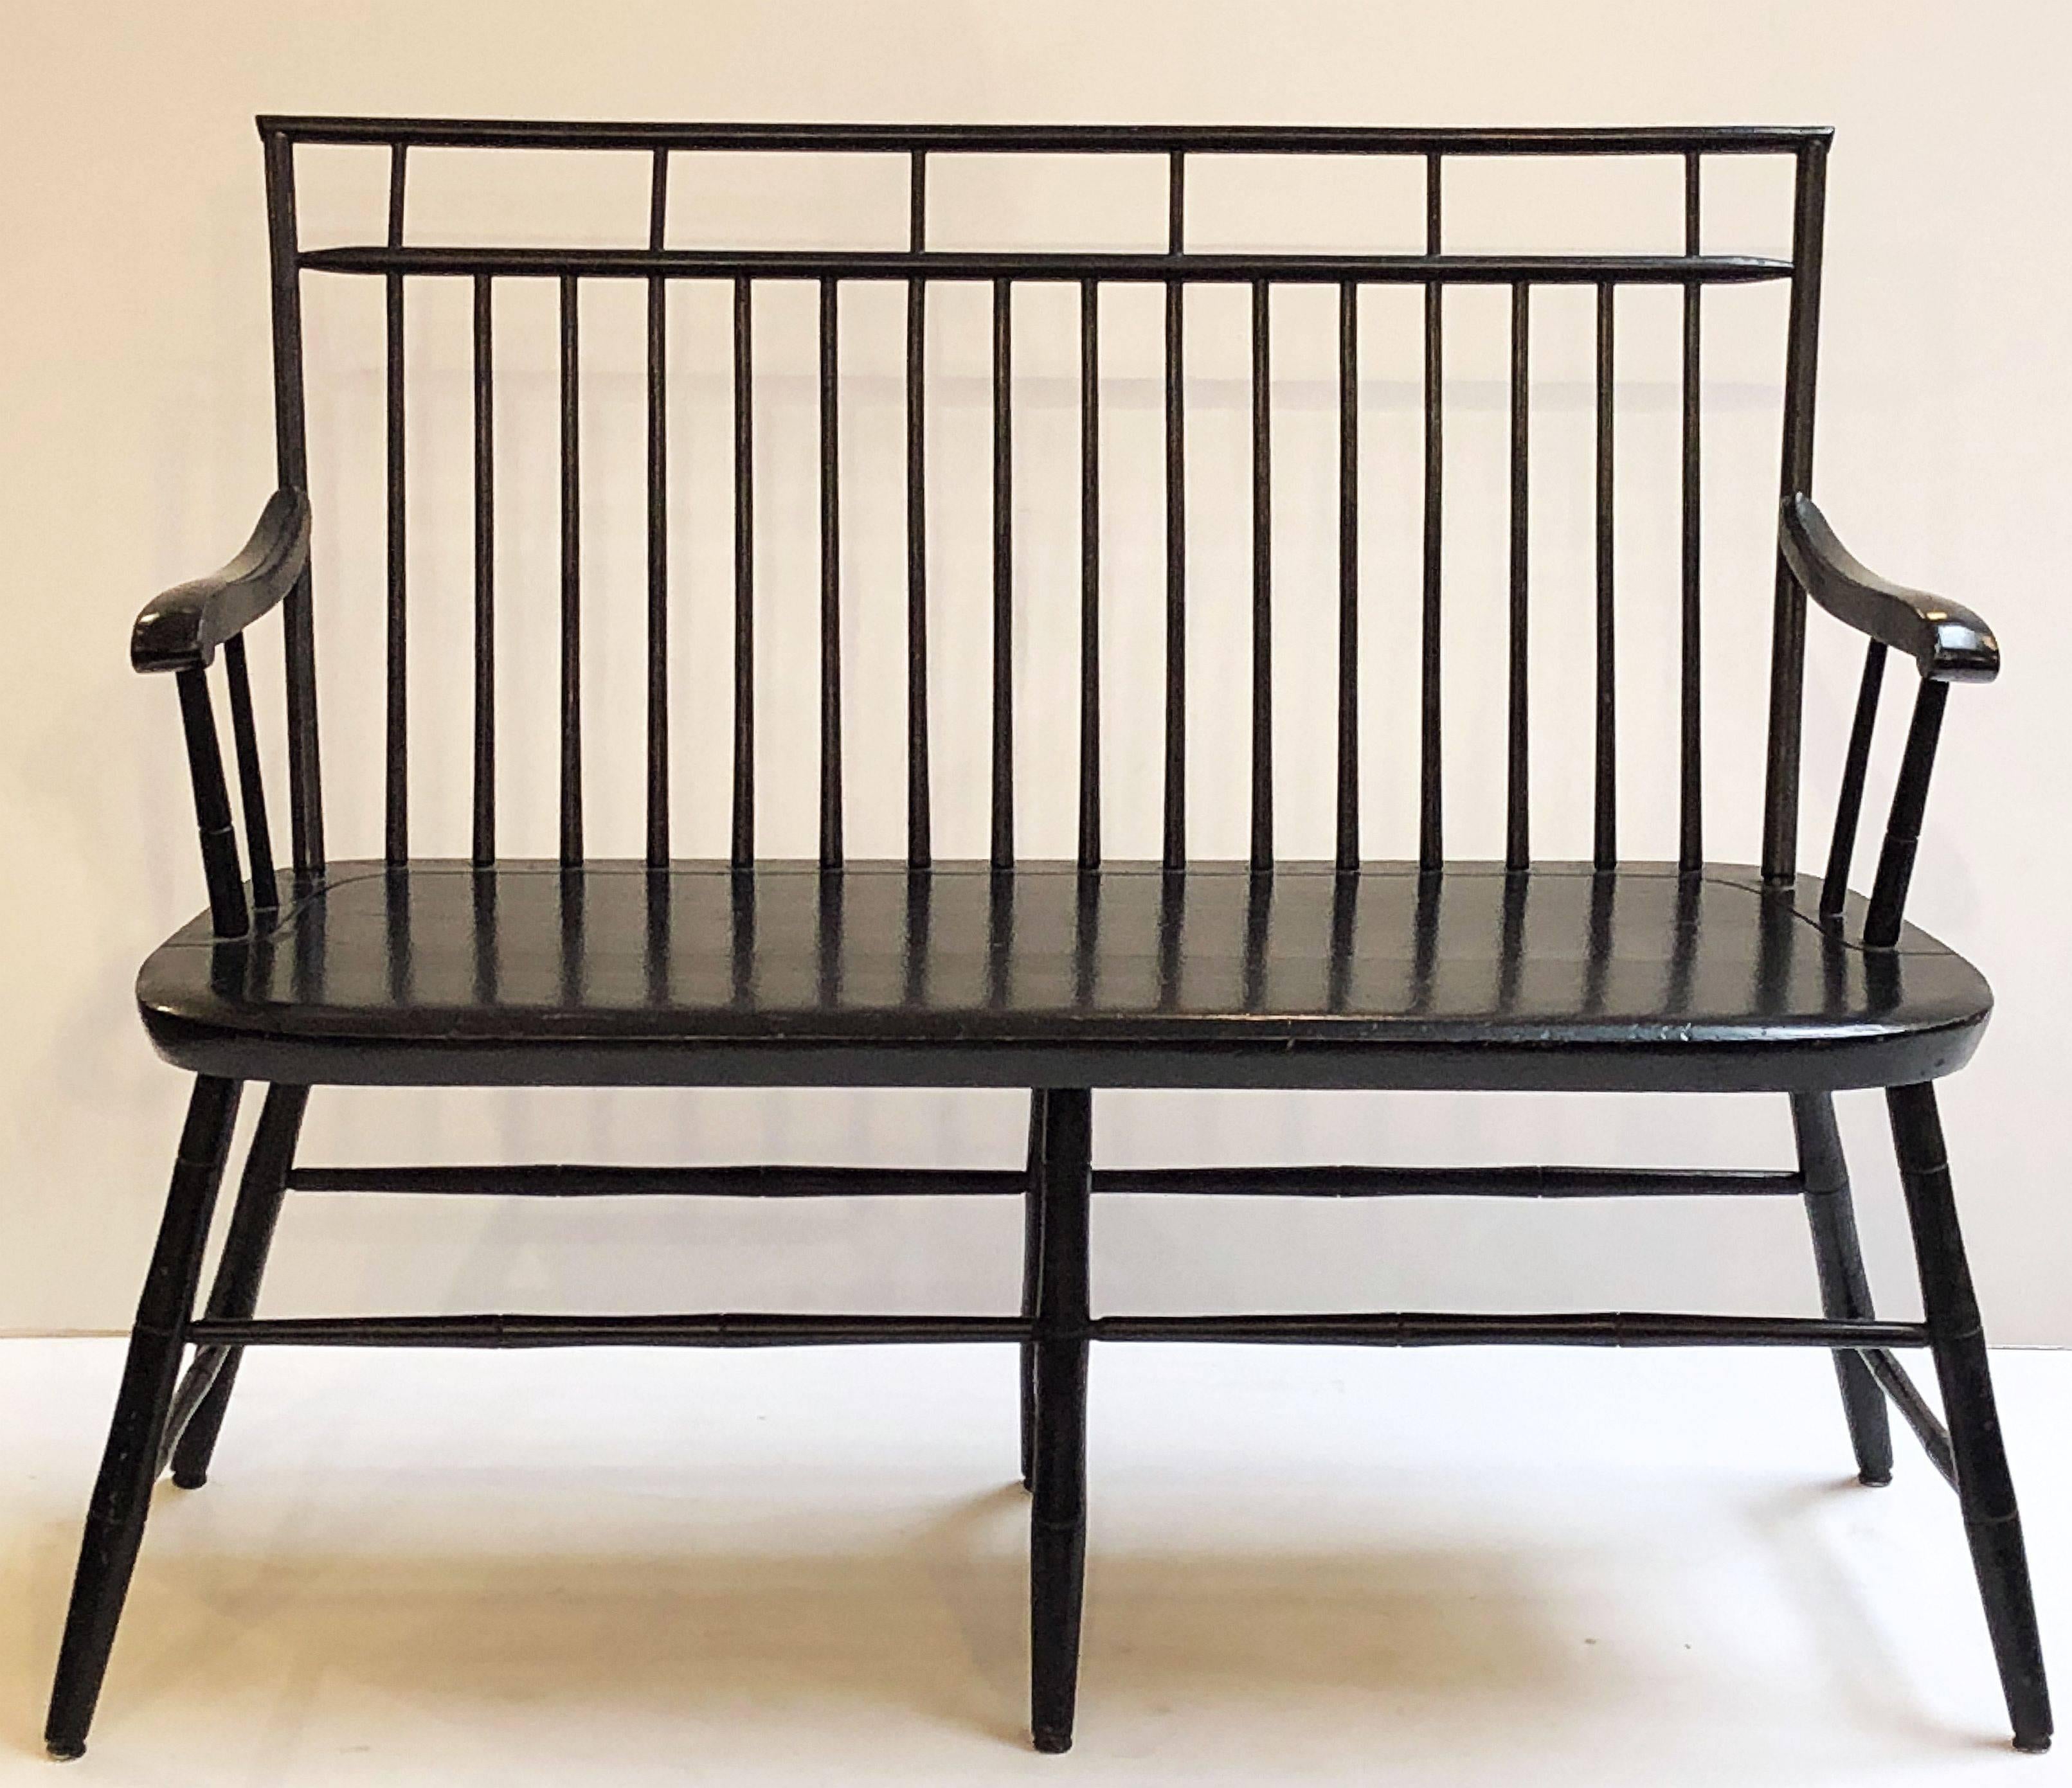 A fine American settee or seating bench of black-painted wood, featuring a spindle back, serpentine arms, mounted to a comfortable seat with turned leg supports.